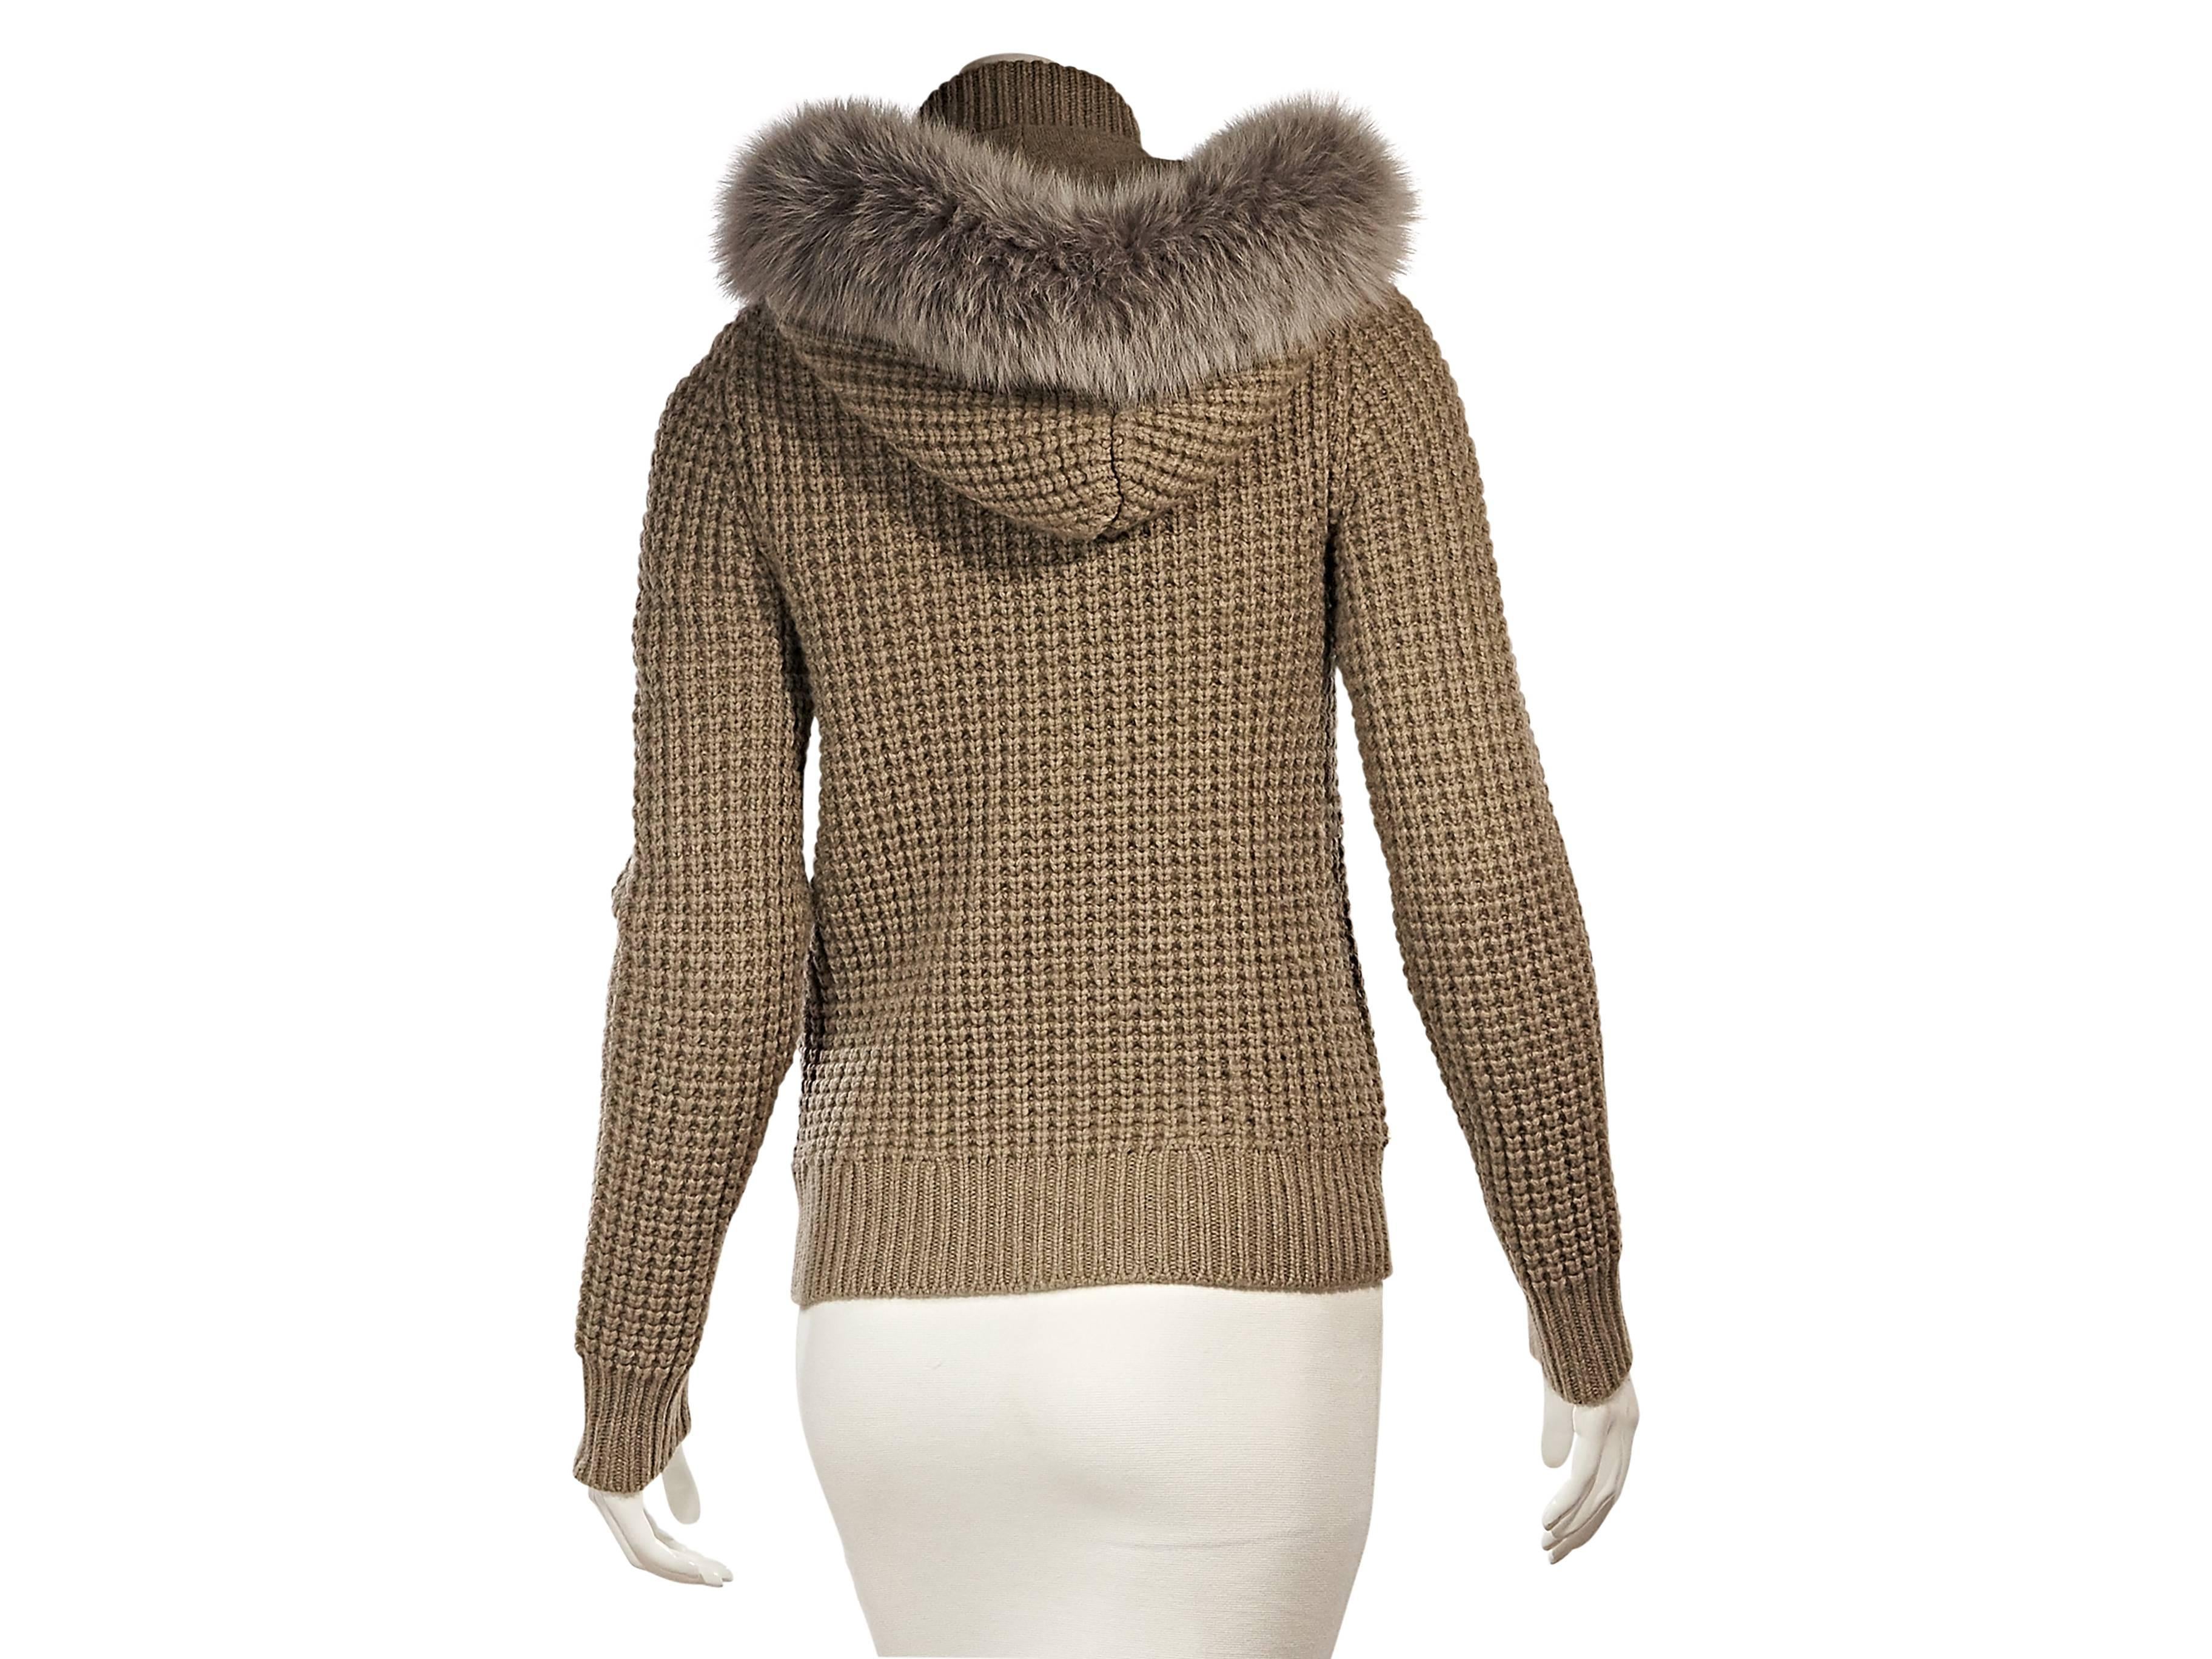 Product details: Tan cashmere sweater jacket by Michael Kors. Attached hood trimmed with dyed fox fur. Stand collar. Long sleeves. Zip-front closure. Two front zip pockets. 
Condition: Excellent. 
Retails: $2150